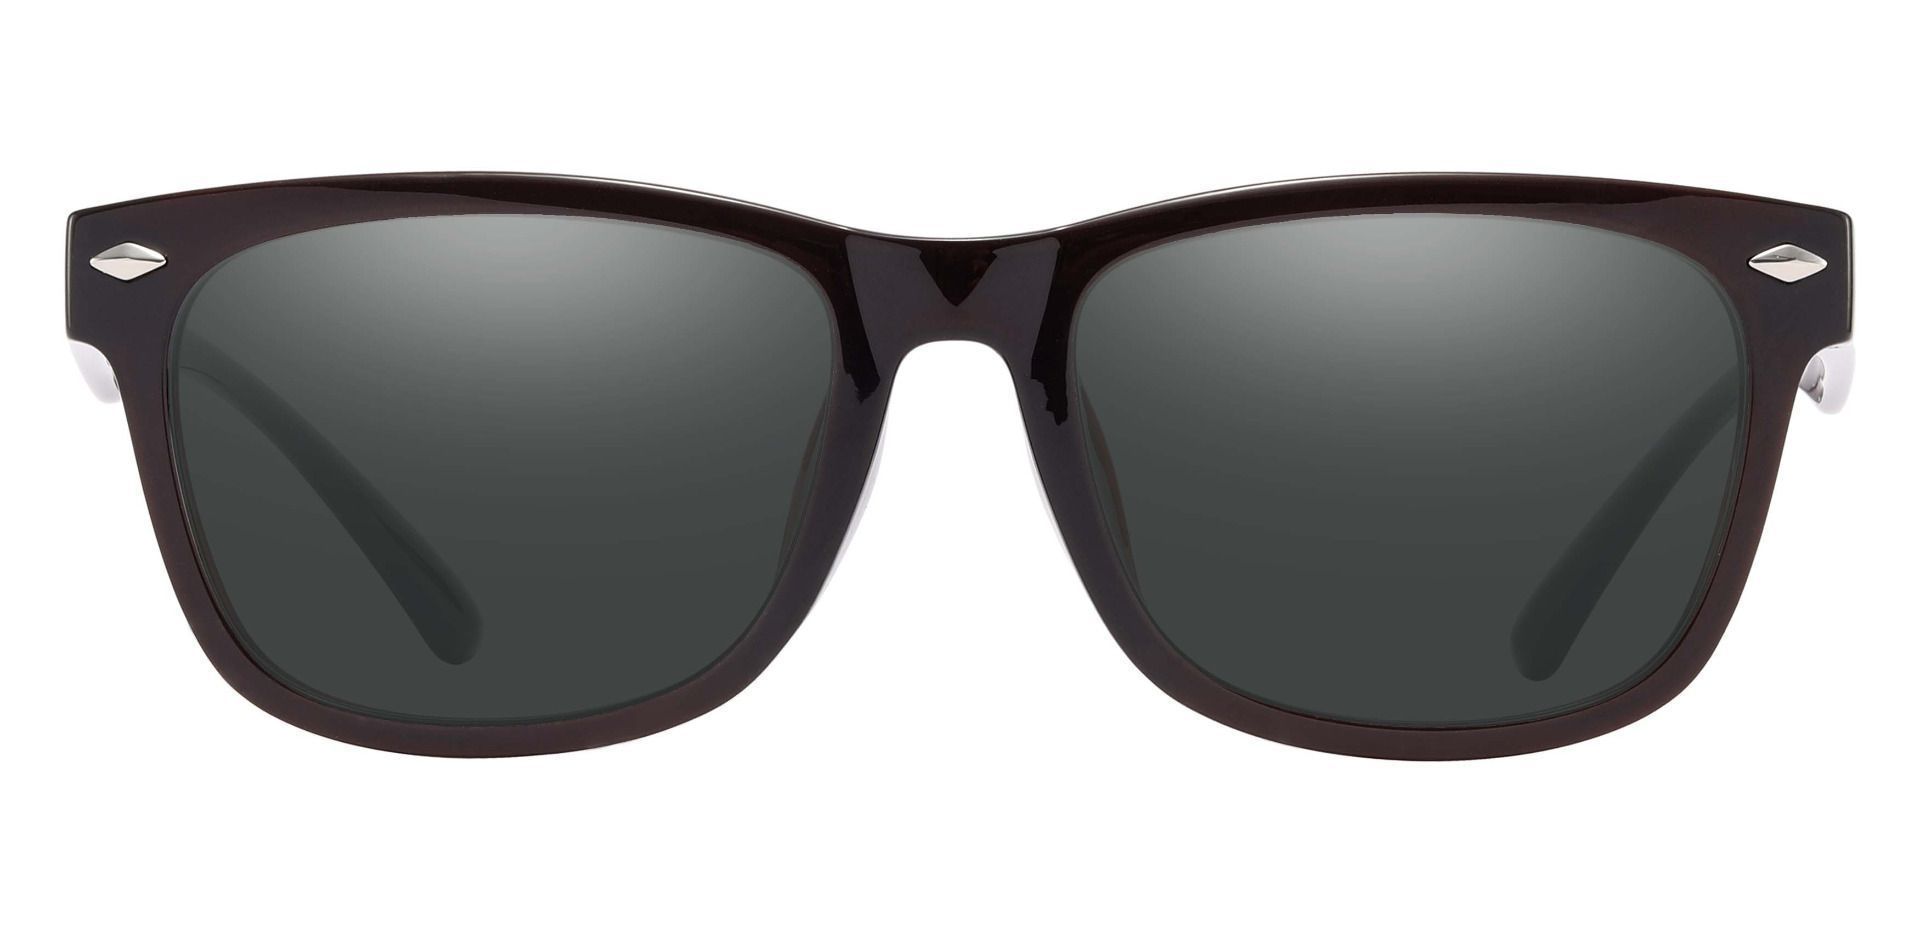 Shaler Square Non-Rx Sunglasses - Red Frame With Gray Lenses